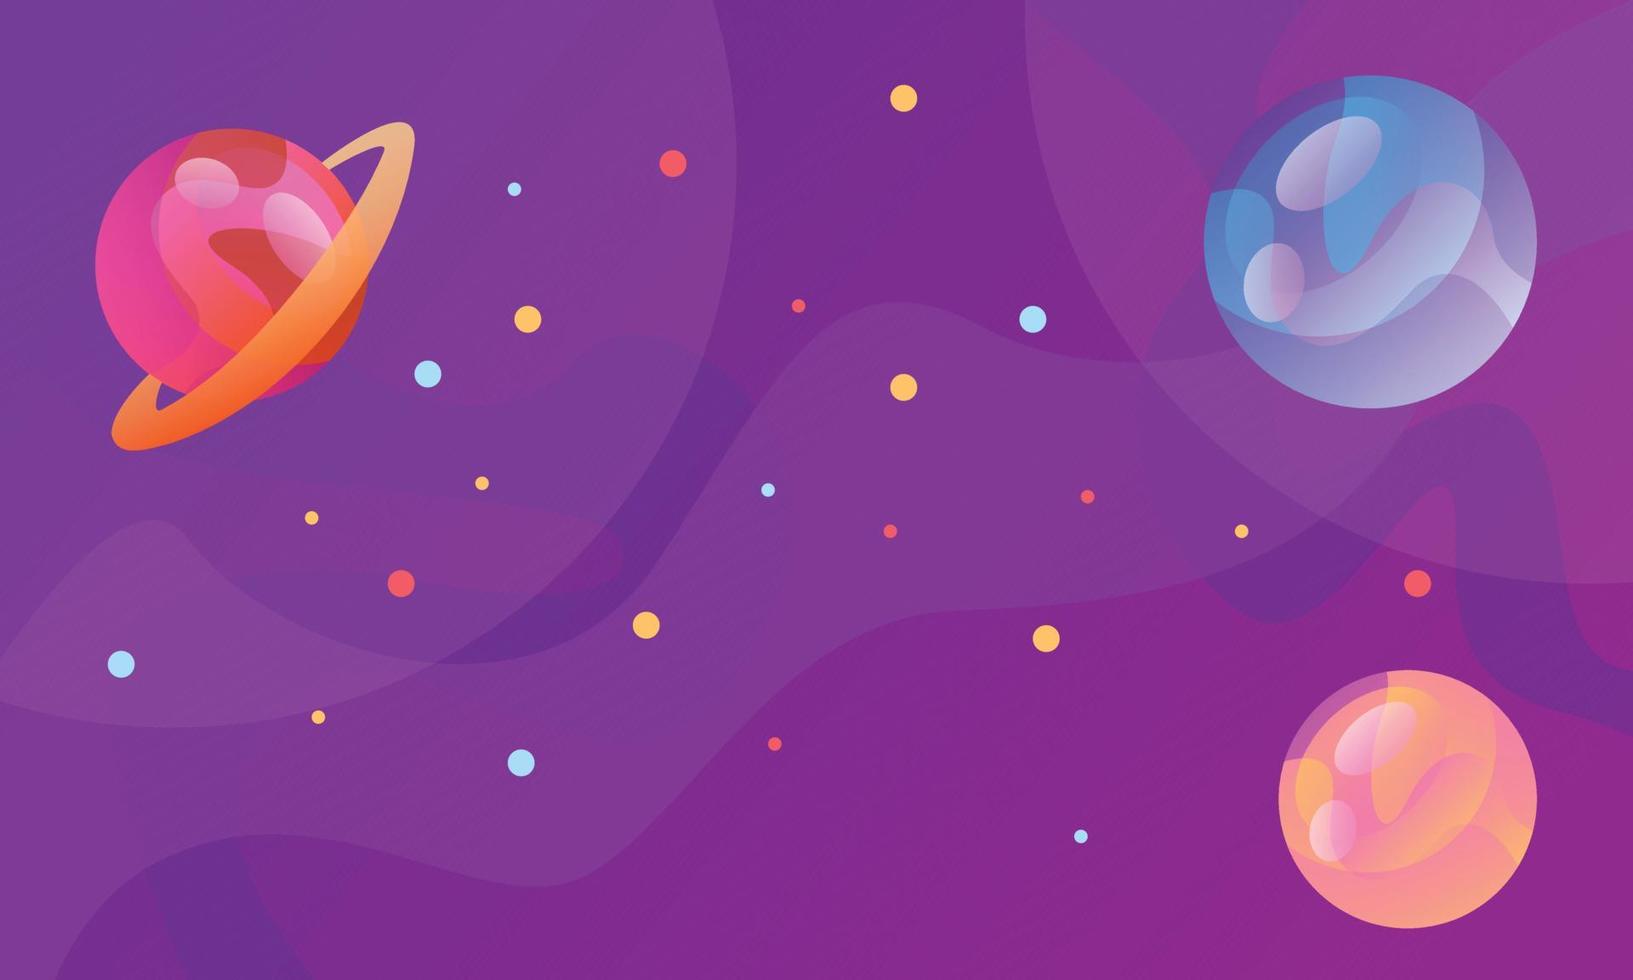 Galaxy Cartoon with Planet Illustration Background vector